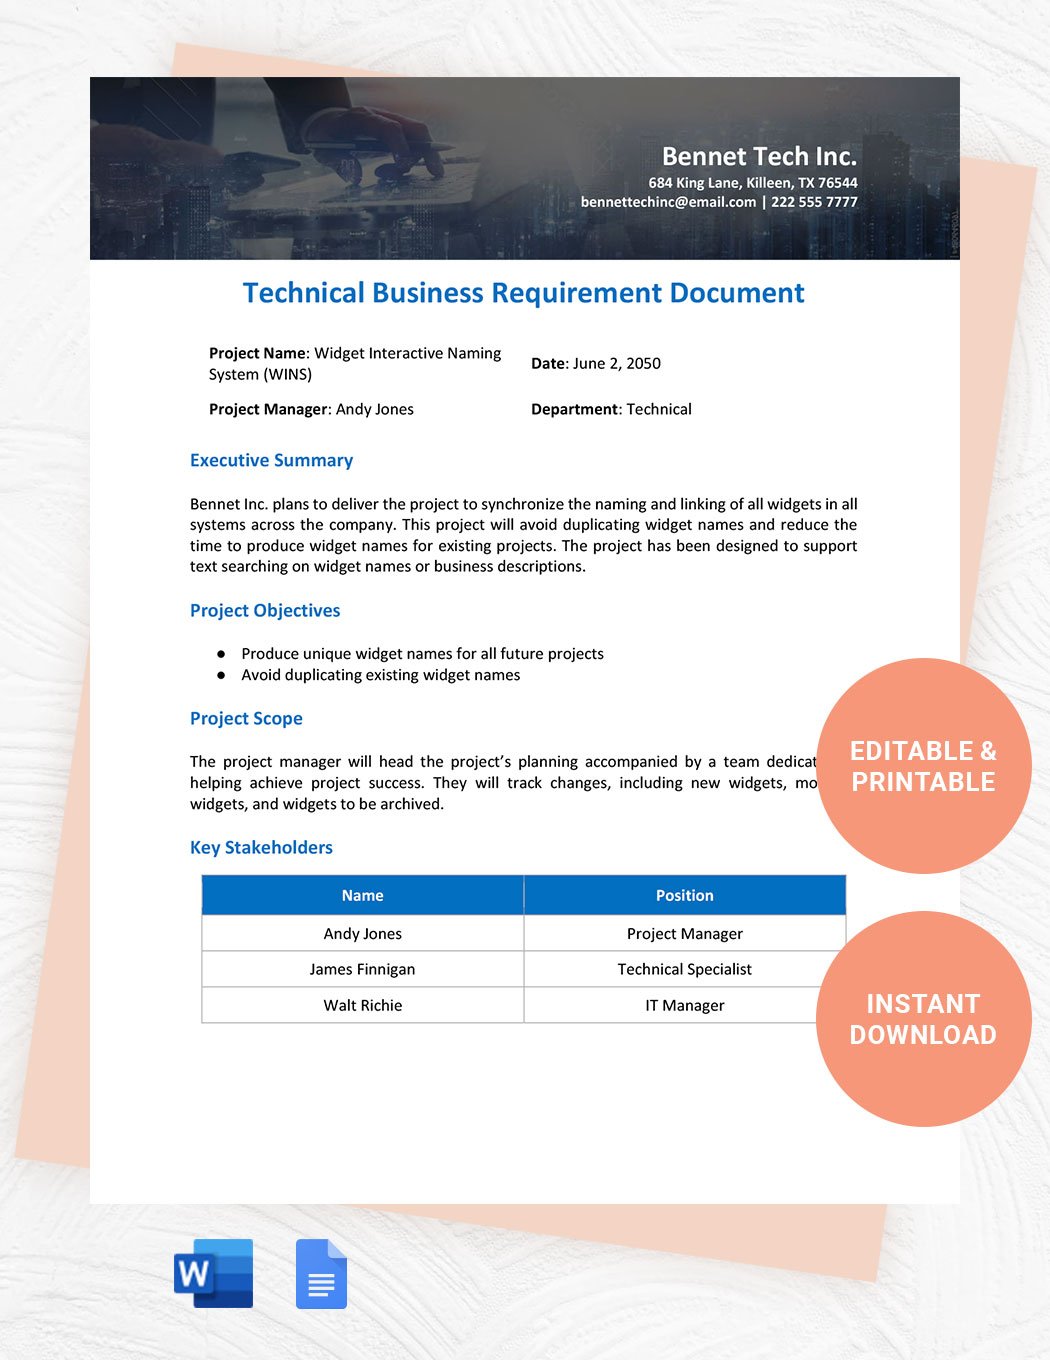 Technical Business Requirements Document Template Download in Word